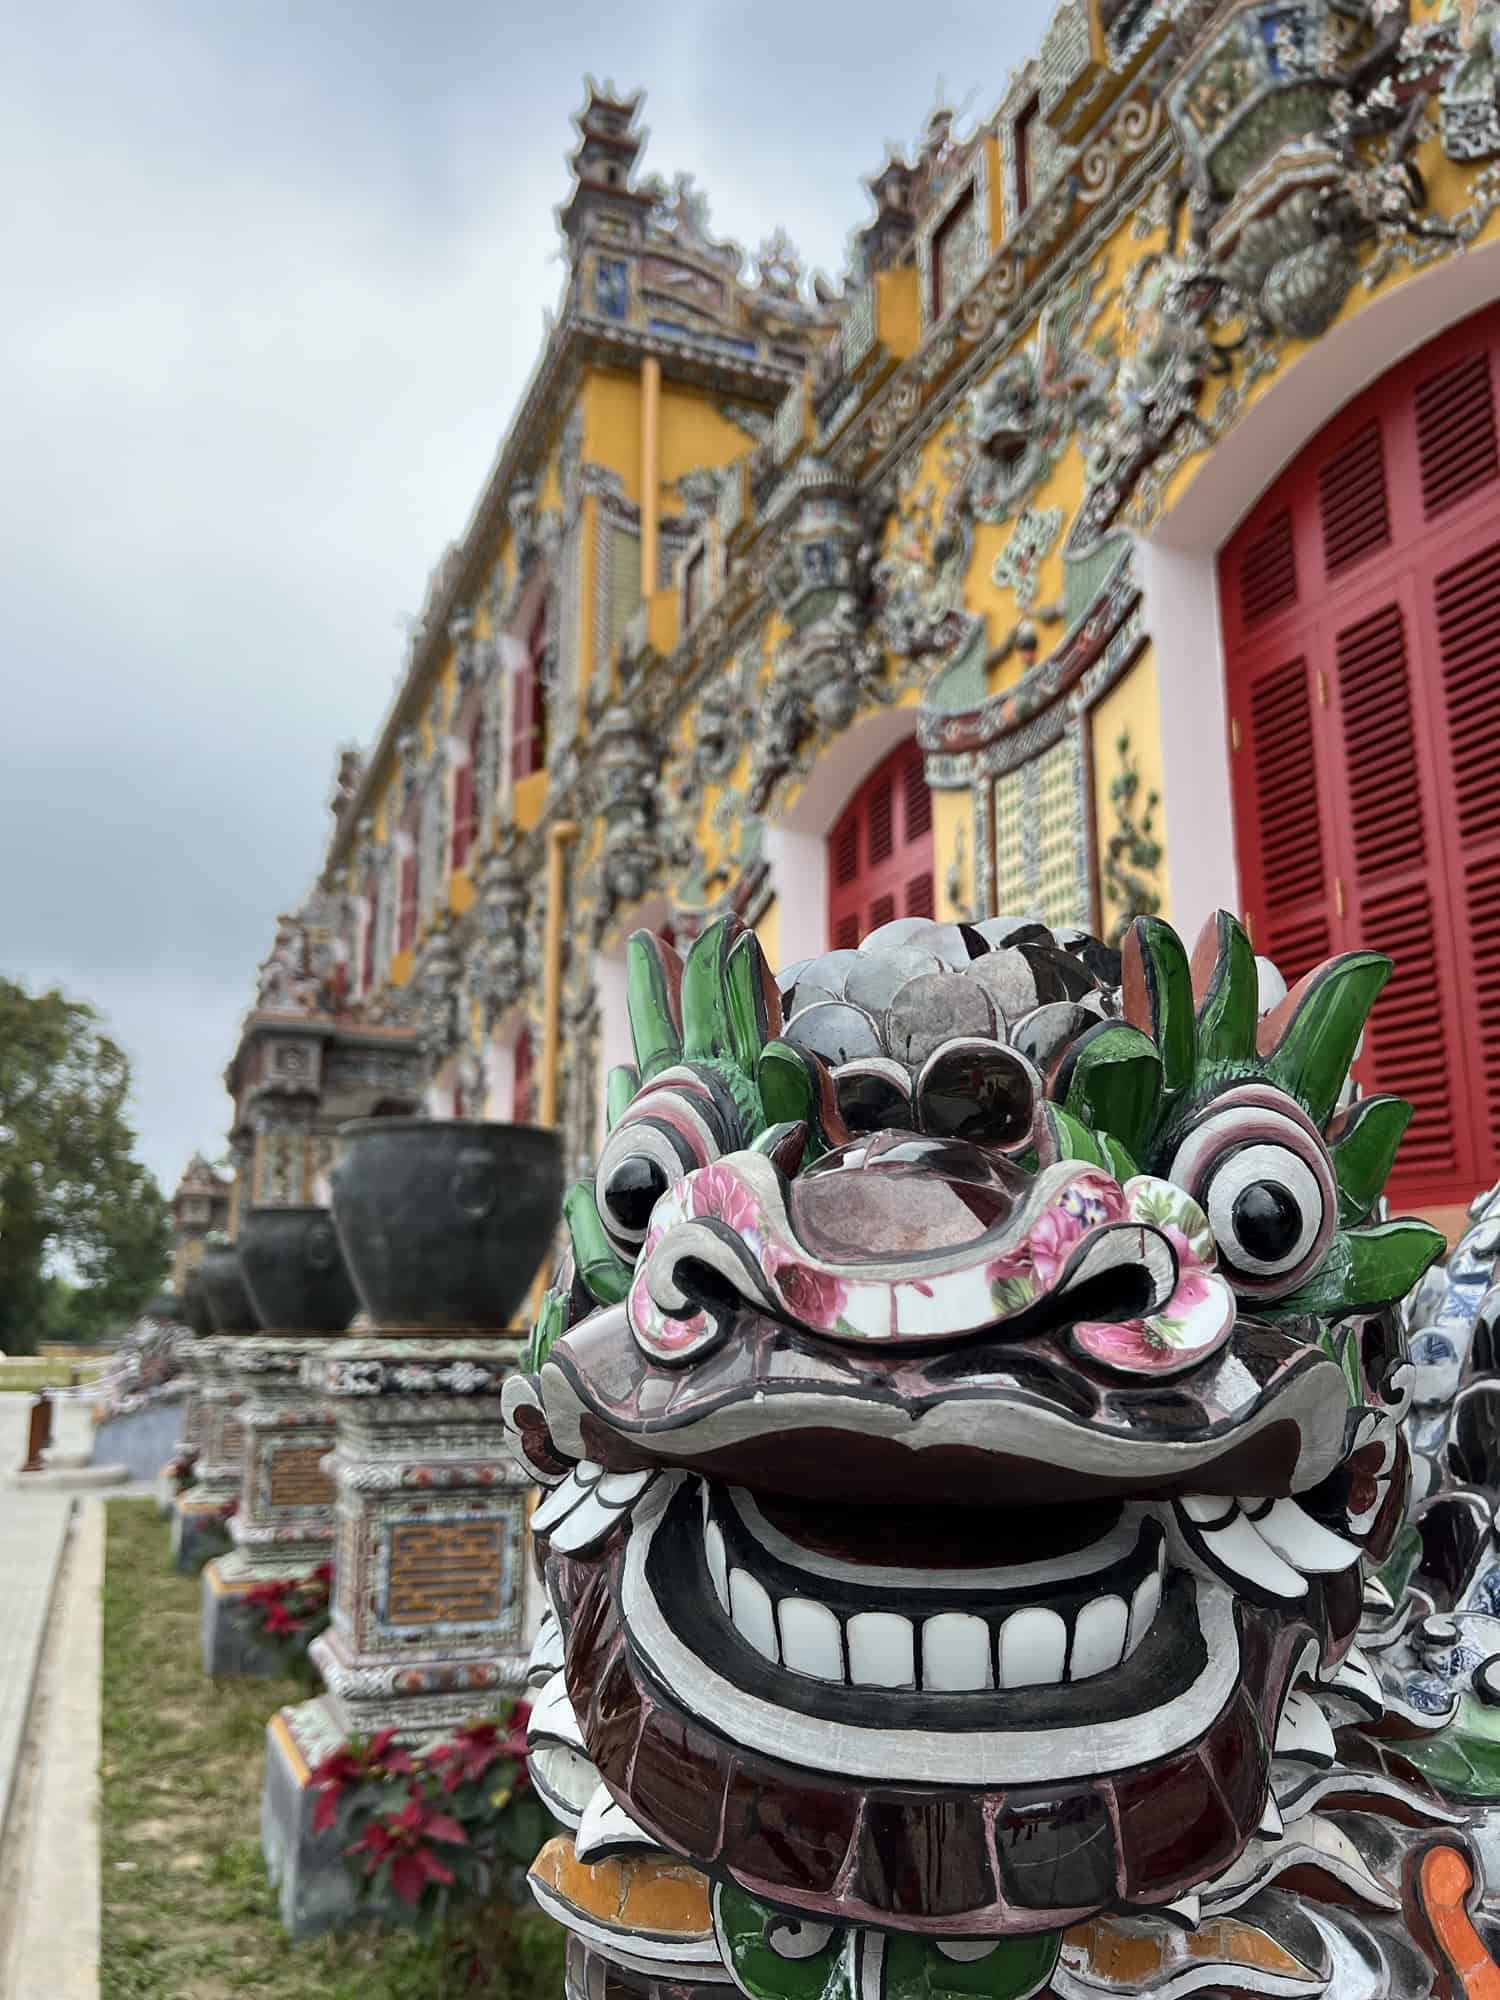 Dragon guarding the entrance to the Emperors Palace at the Citadel in Hue